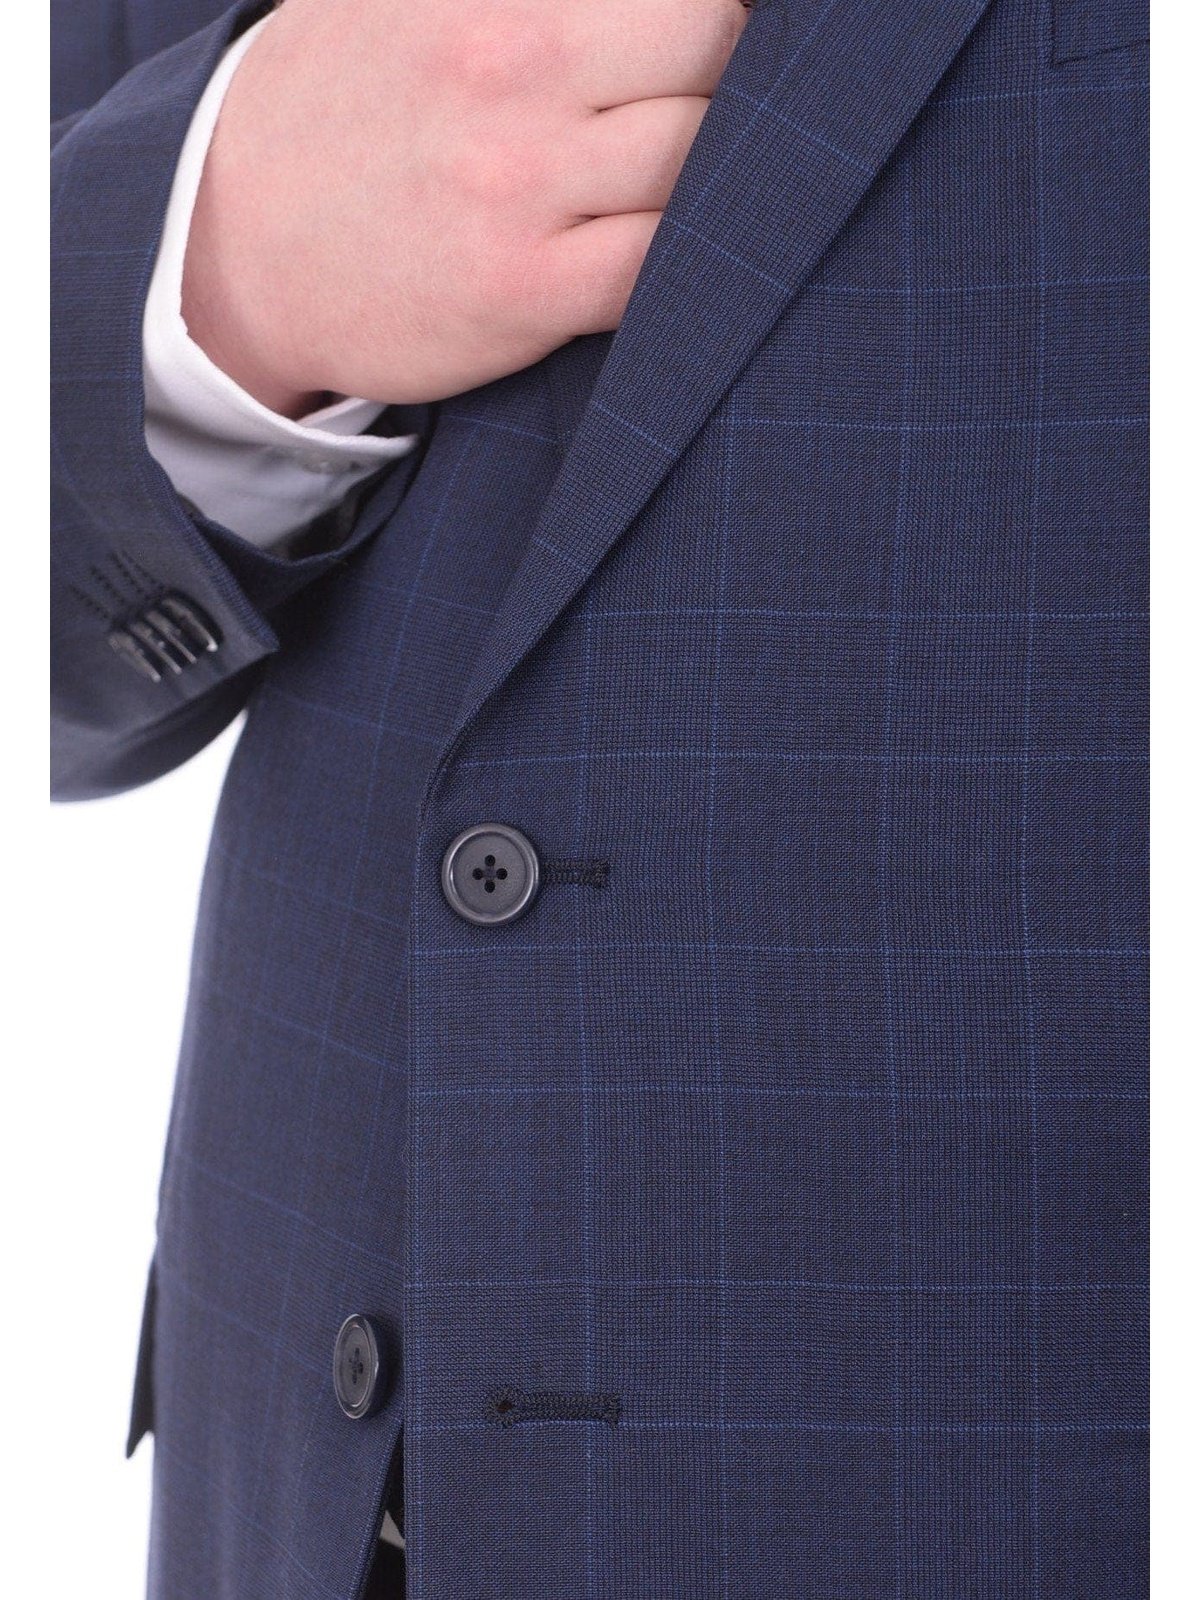 Lazetti Couture Sale Suits Lazetti Couture Portly Fit Blue Plaid With Overcheck Two Button Wool Suit